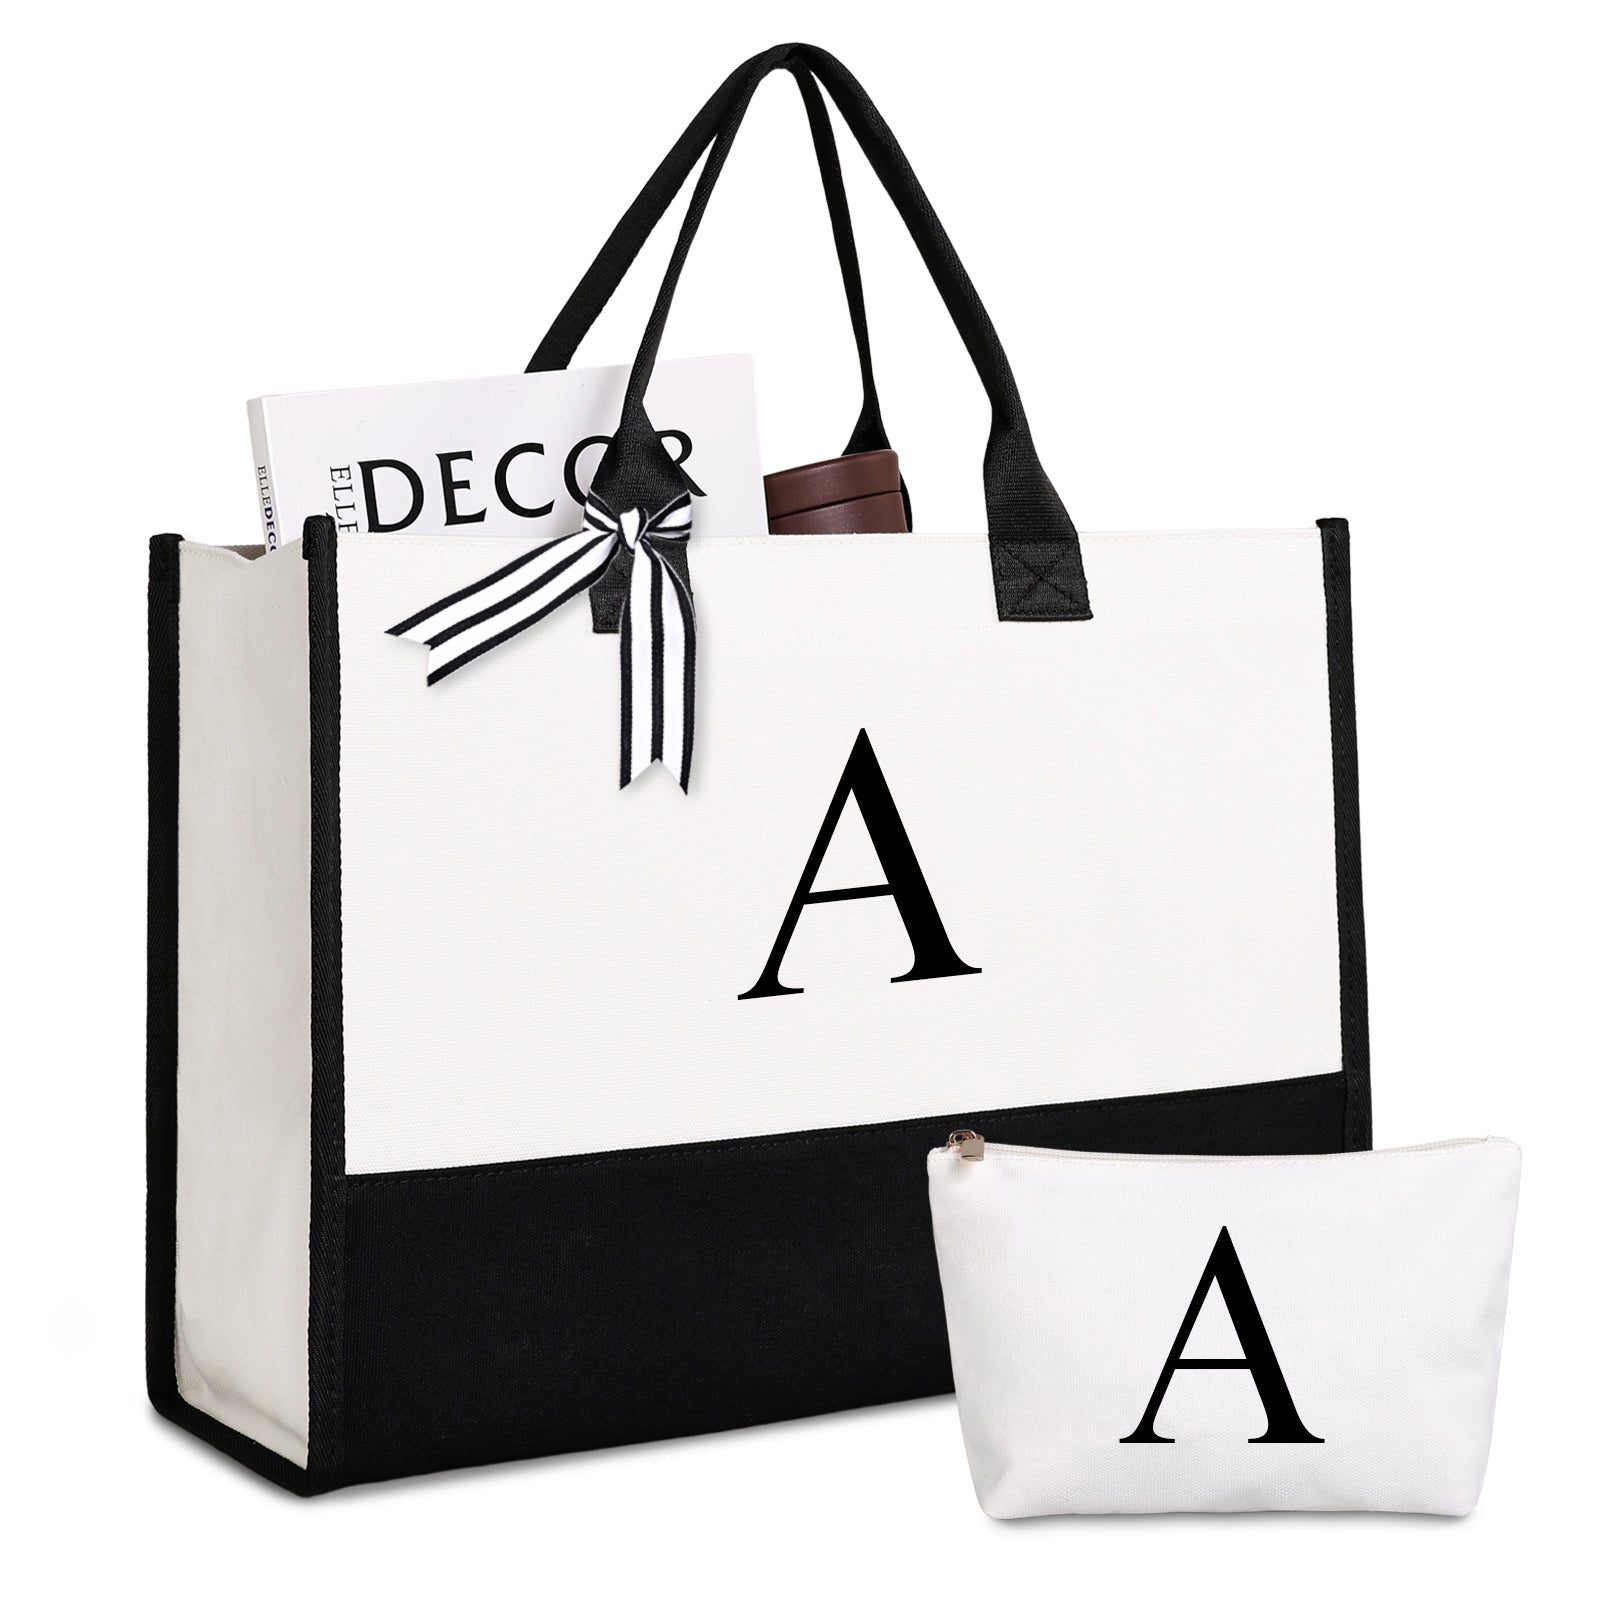 Monogrammed Tote Bags & Personalized Beach Bags